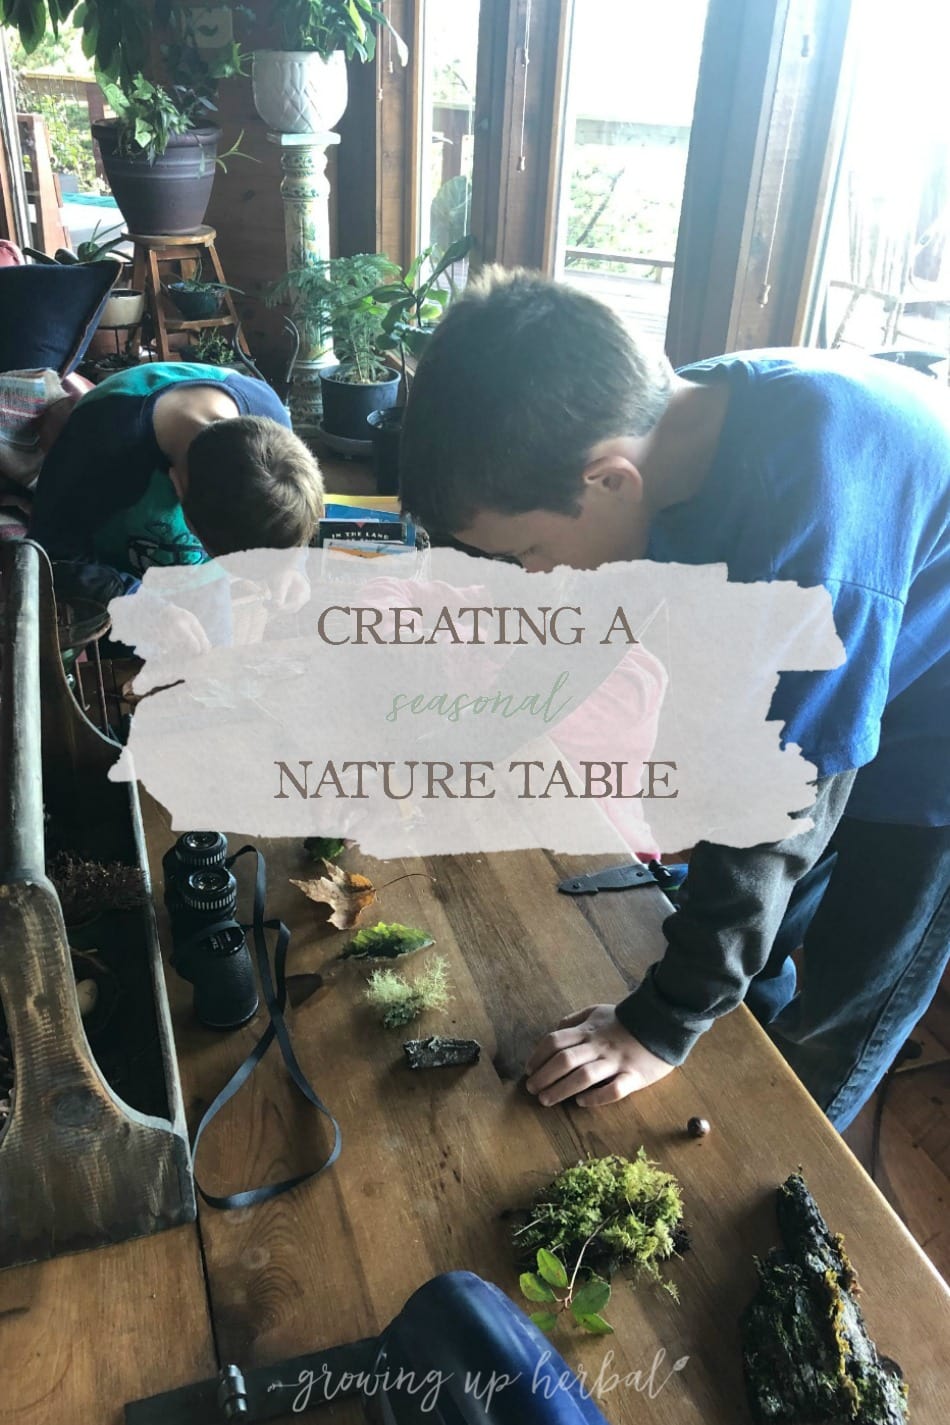 Creating A Seasonal Nature Table | Growing Up Herbal | Here’s how to create a simple seasonal nature table for your homeschool science or nature study lessons.